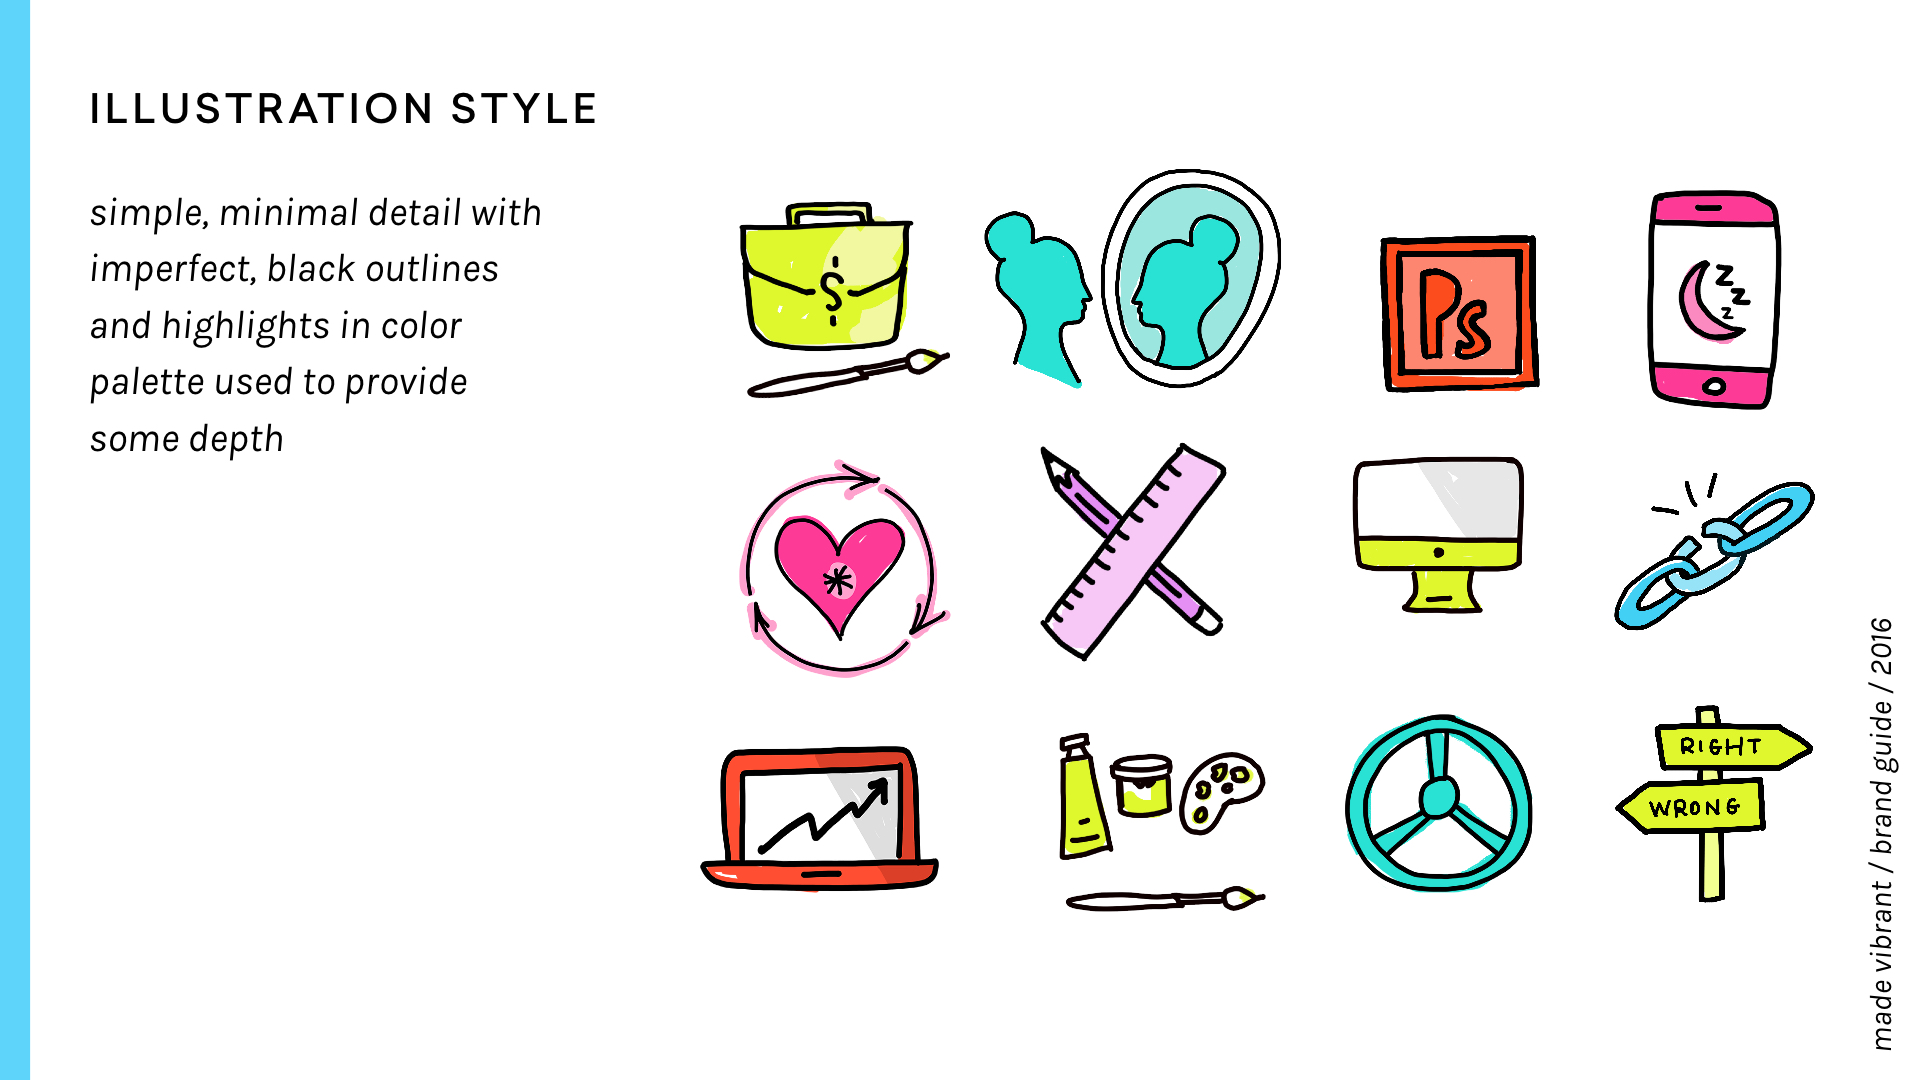 Made Vibrant 3.0 Brand Guidelines / vibrant, approachable, and creative branding / custom icons and illustrations